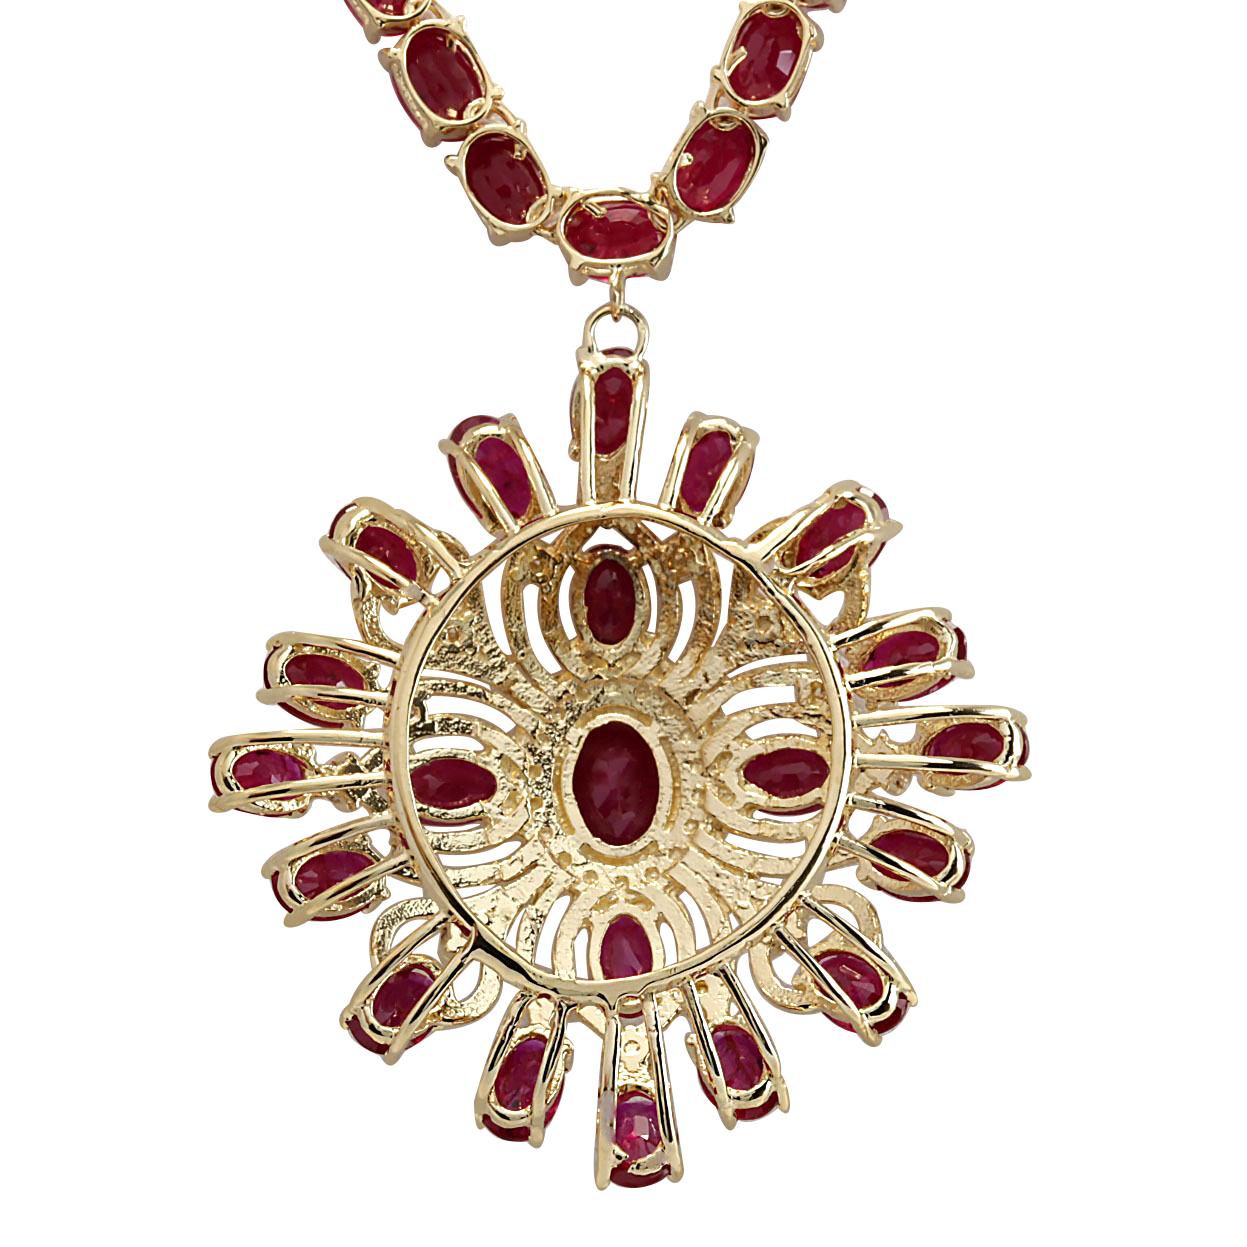 Stamped: 14K Yellow Gold
Total Necklace Weight: 35.0 Grams
Necklace Length: 17 Inches
Total Natural Center Ruby Weight is 1.82 Carat (Measures: 8.00x6.00 mm)
Color: Red
Total Natural Side Ruby Weight is 54.80 Carat
Color: Red
Total Natural Diamond